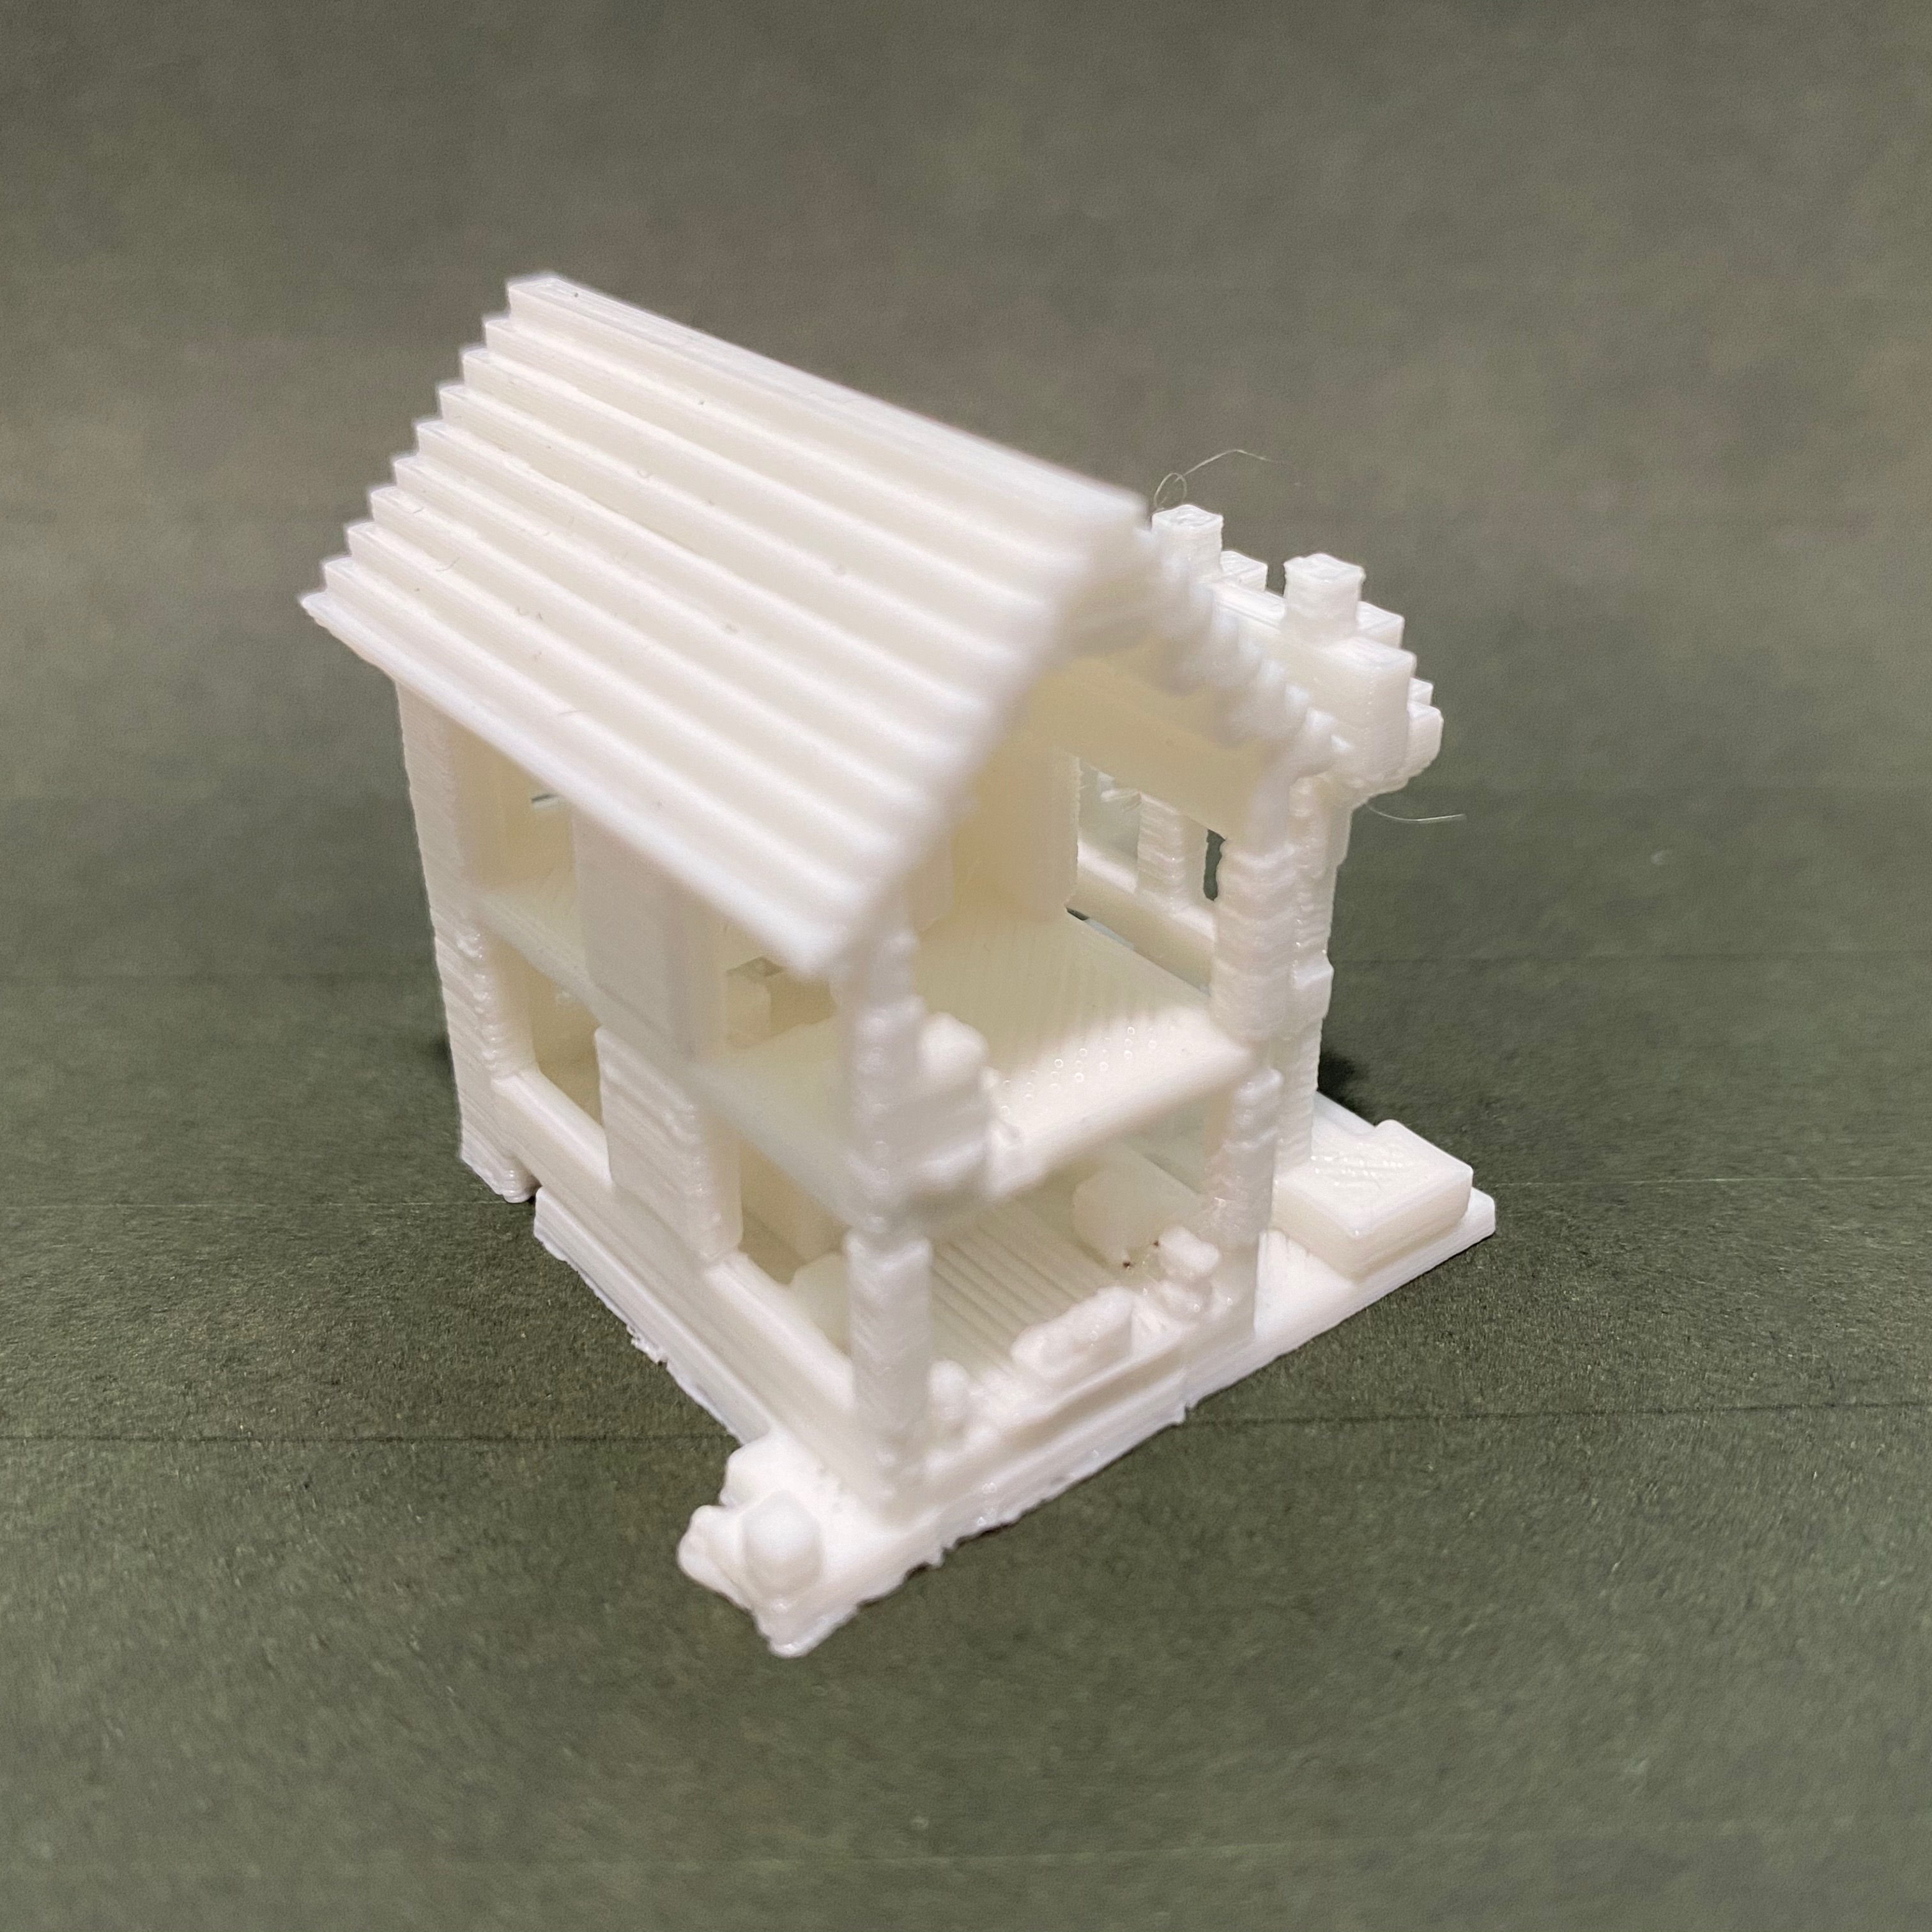 3D printed Minecraft House(front)